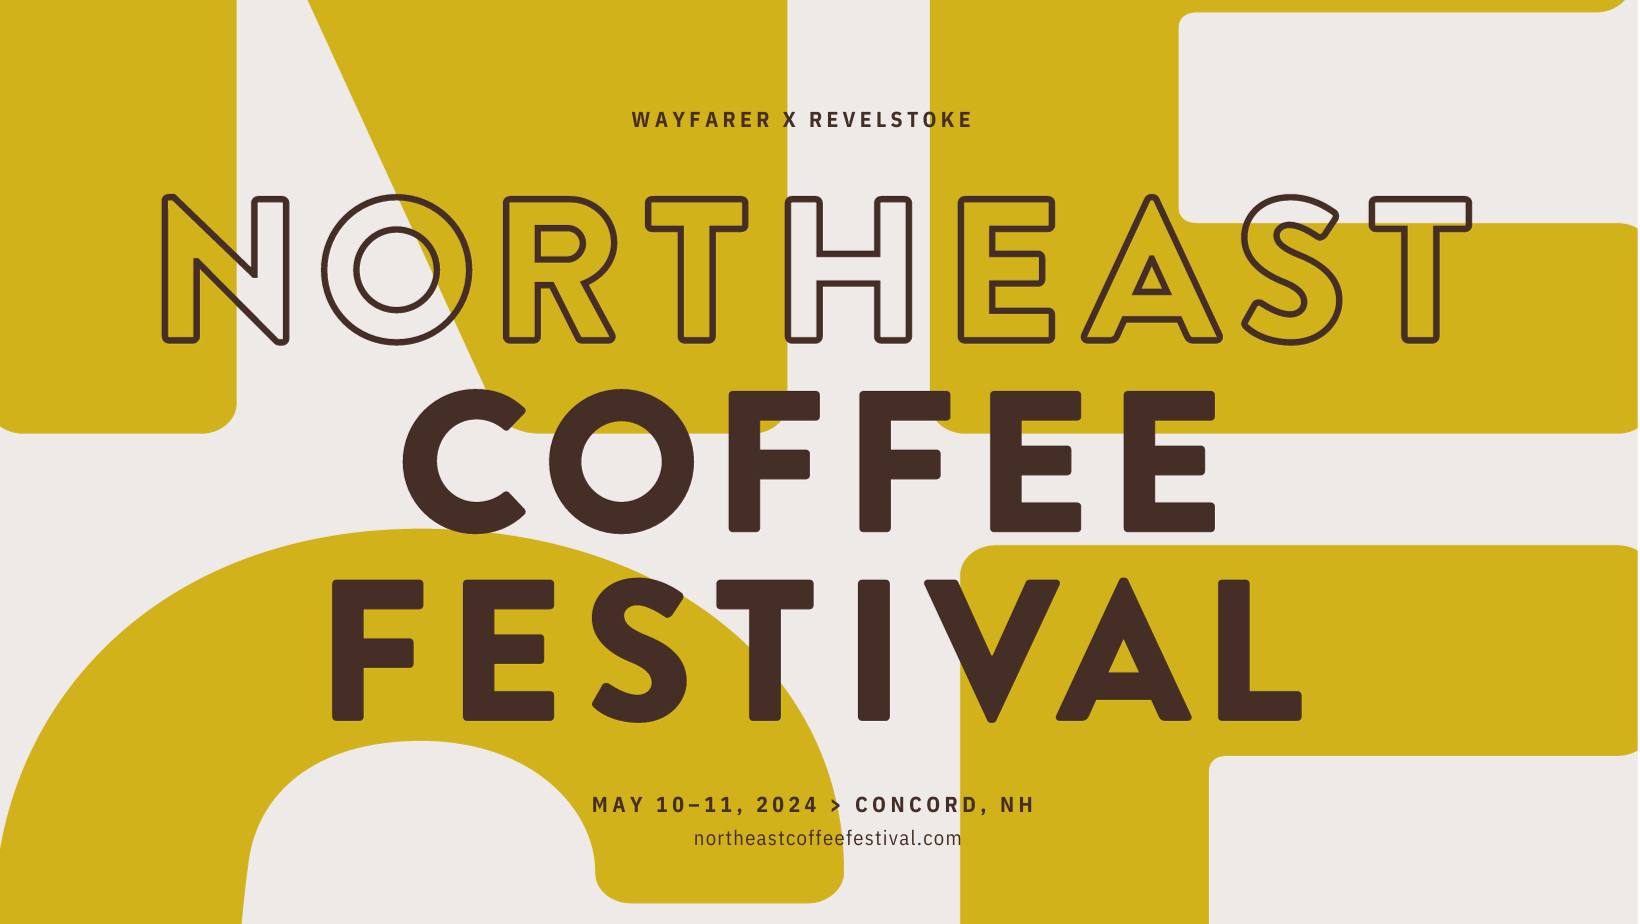 Win Tickets to the Northeast Coffee Festival Happening in Concord on May 10-11th!